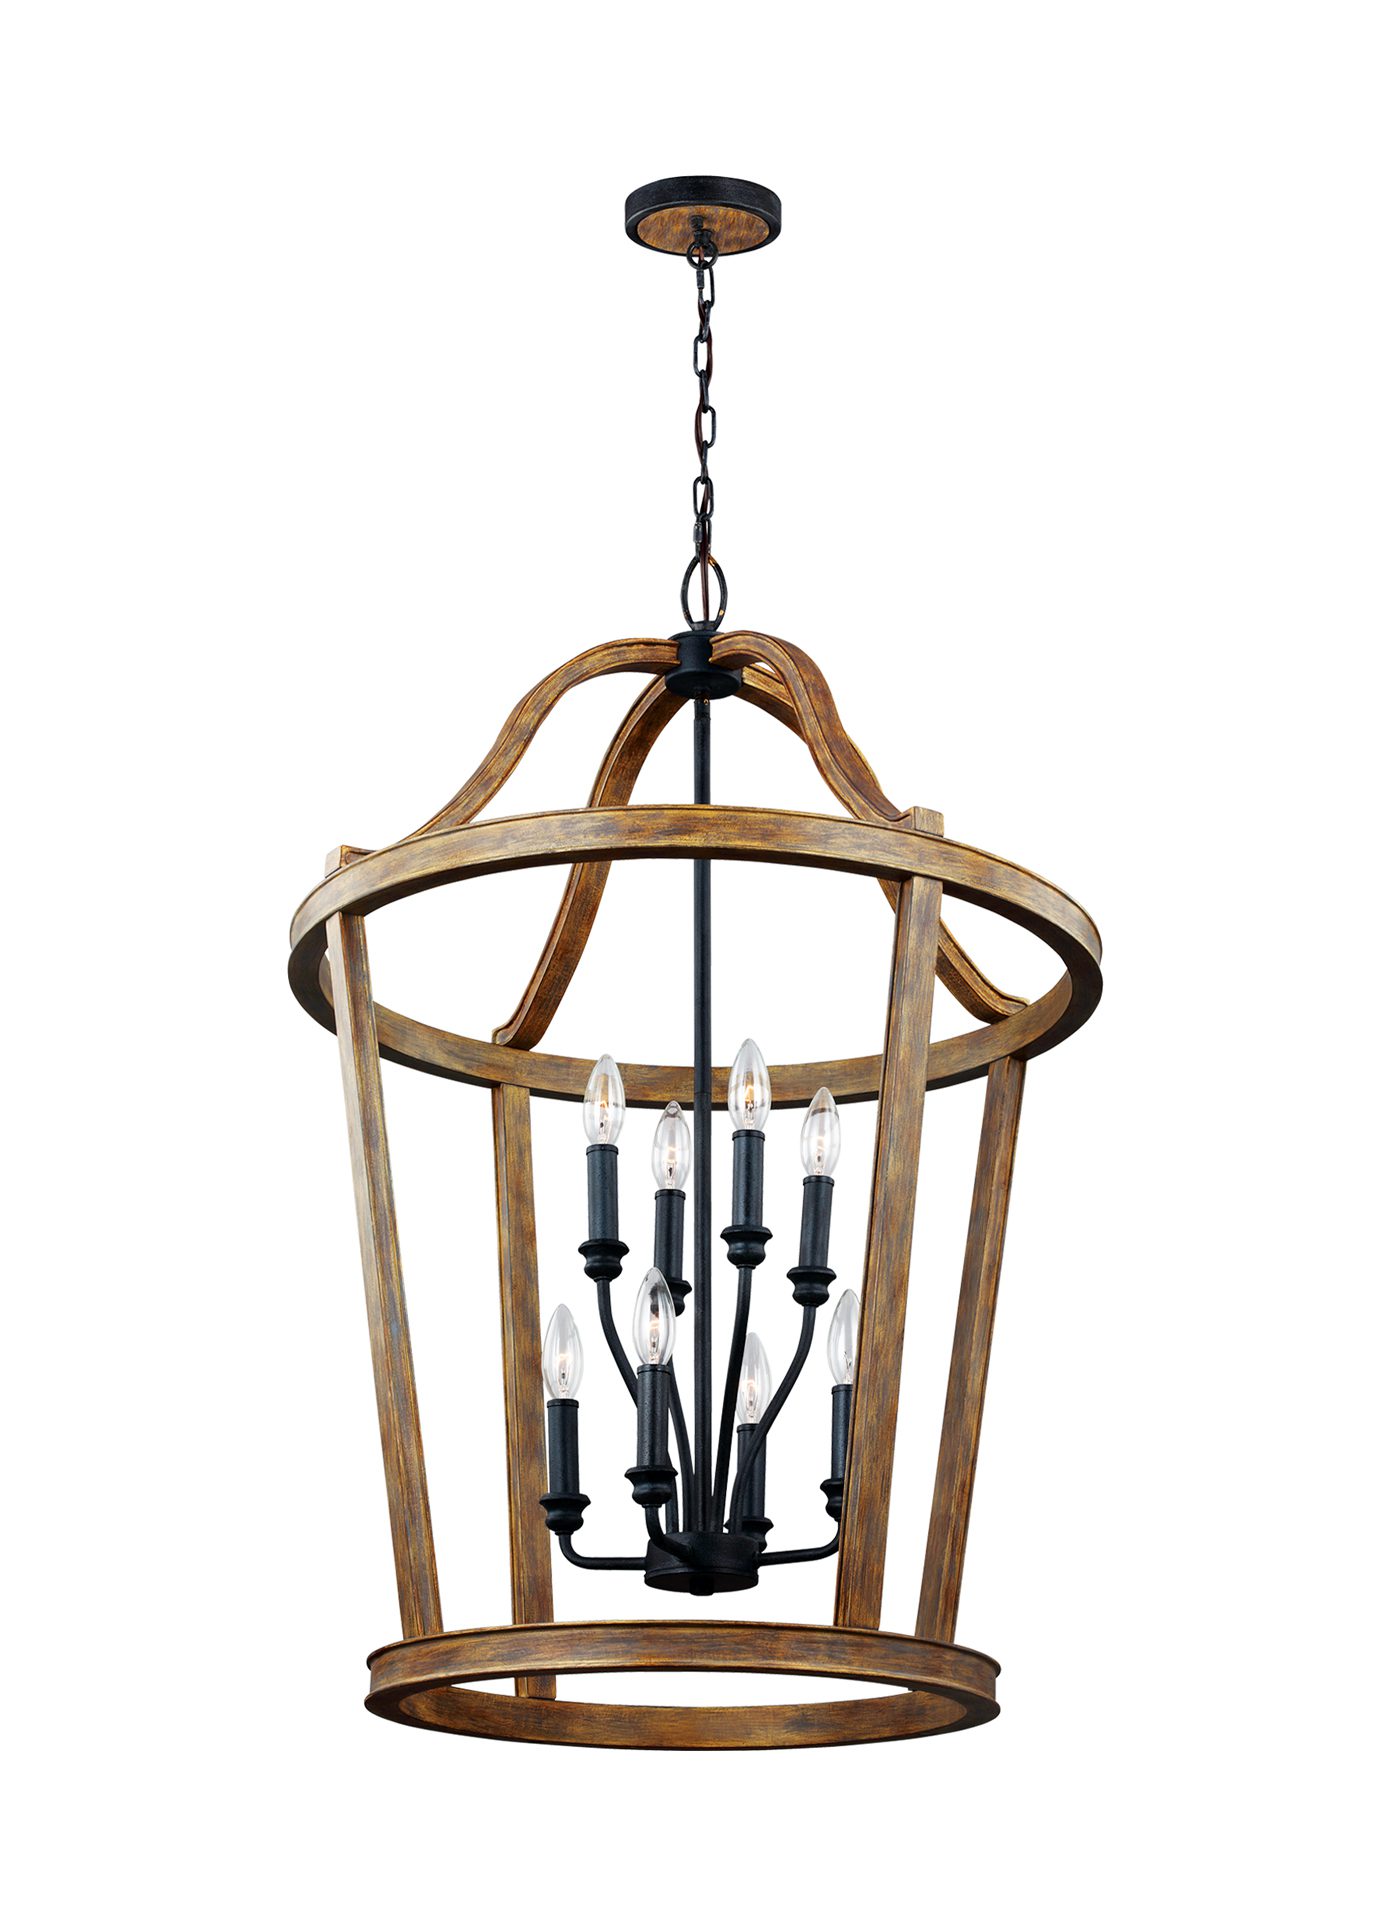 A large chandelier with a wood dome surrounding several light bulbs connected in black metal